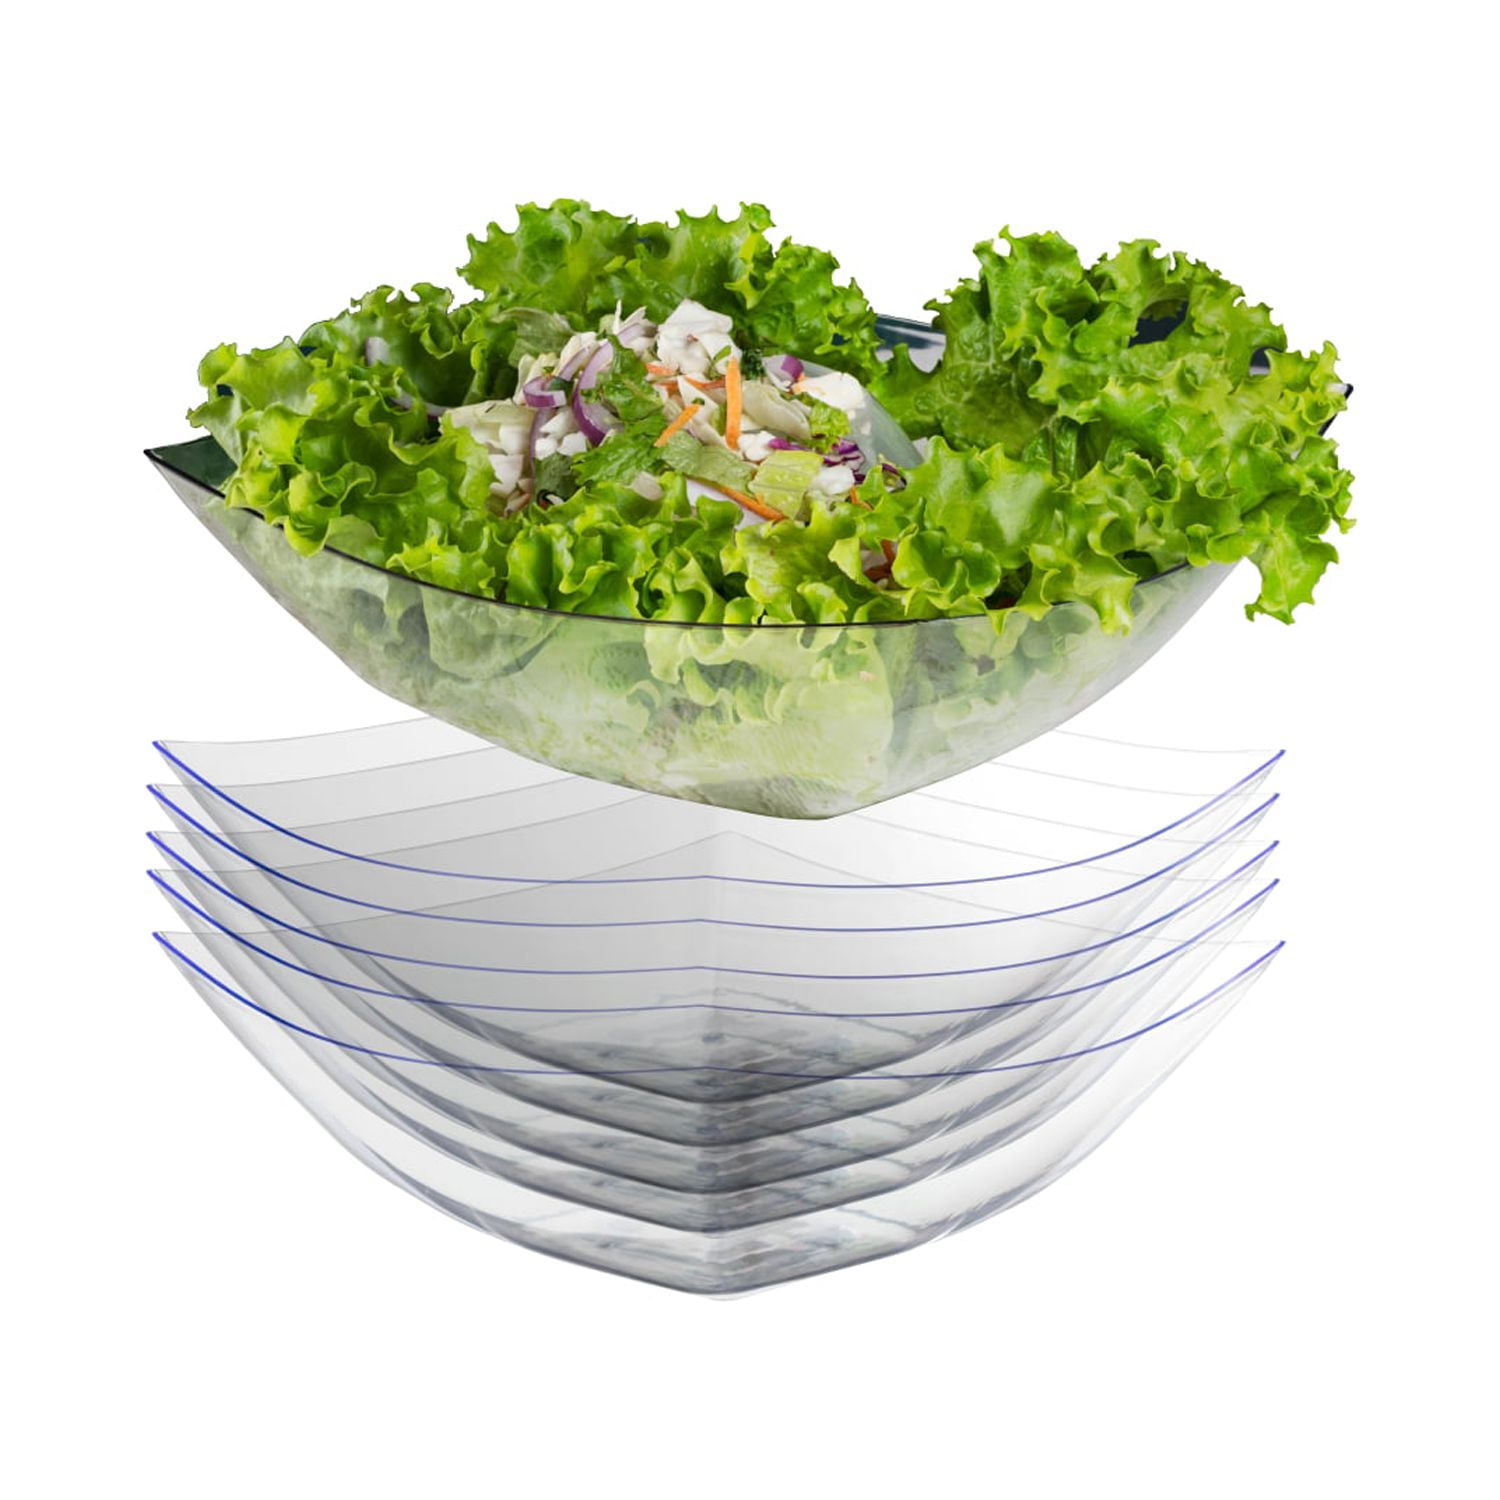  DOITOOL Creative Glass Serving Bowls, Round Salad Container,  Clear Salad Serving Bowl with Wood Stand for Pistachios, Edamame, Cherries,  Nuts, Fruits, Candies